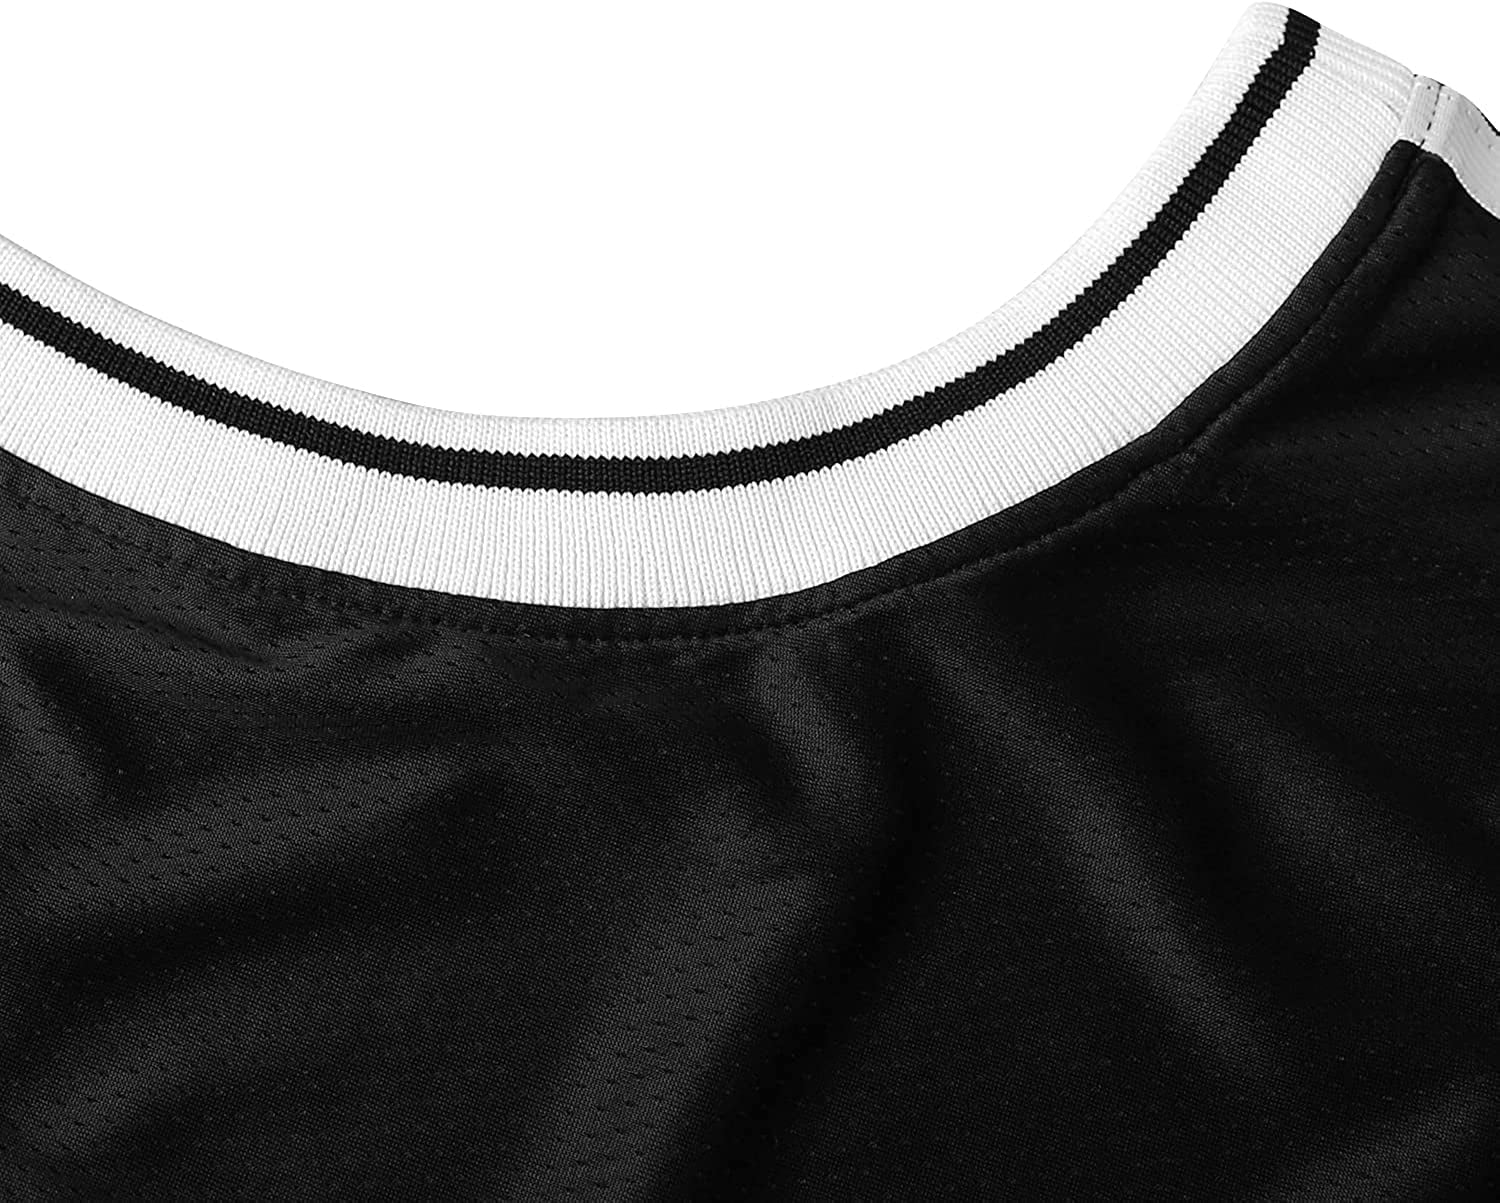 MESOSPERO Blank Basketball Jersey 90S Hip Hop Clothing for Party,Mens Plain  Mesh Athletic Practice Sports Shirts S-3XL in 2023